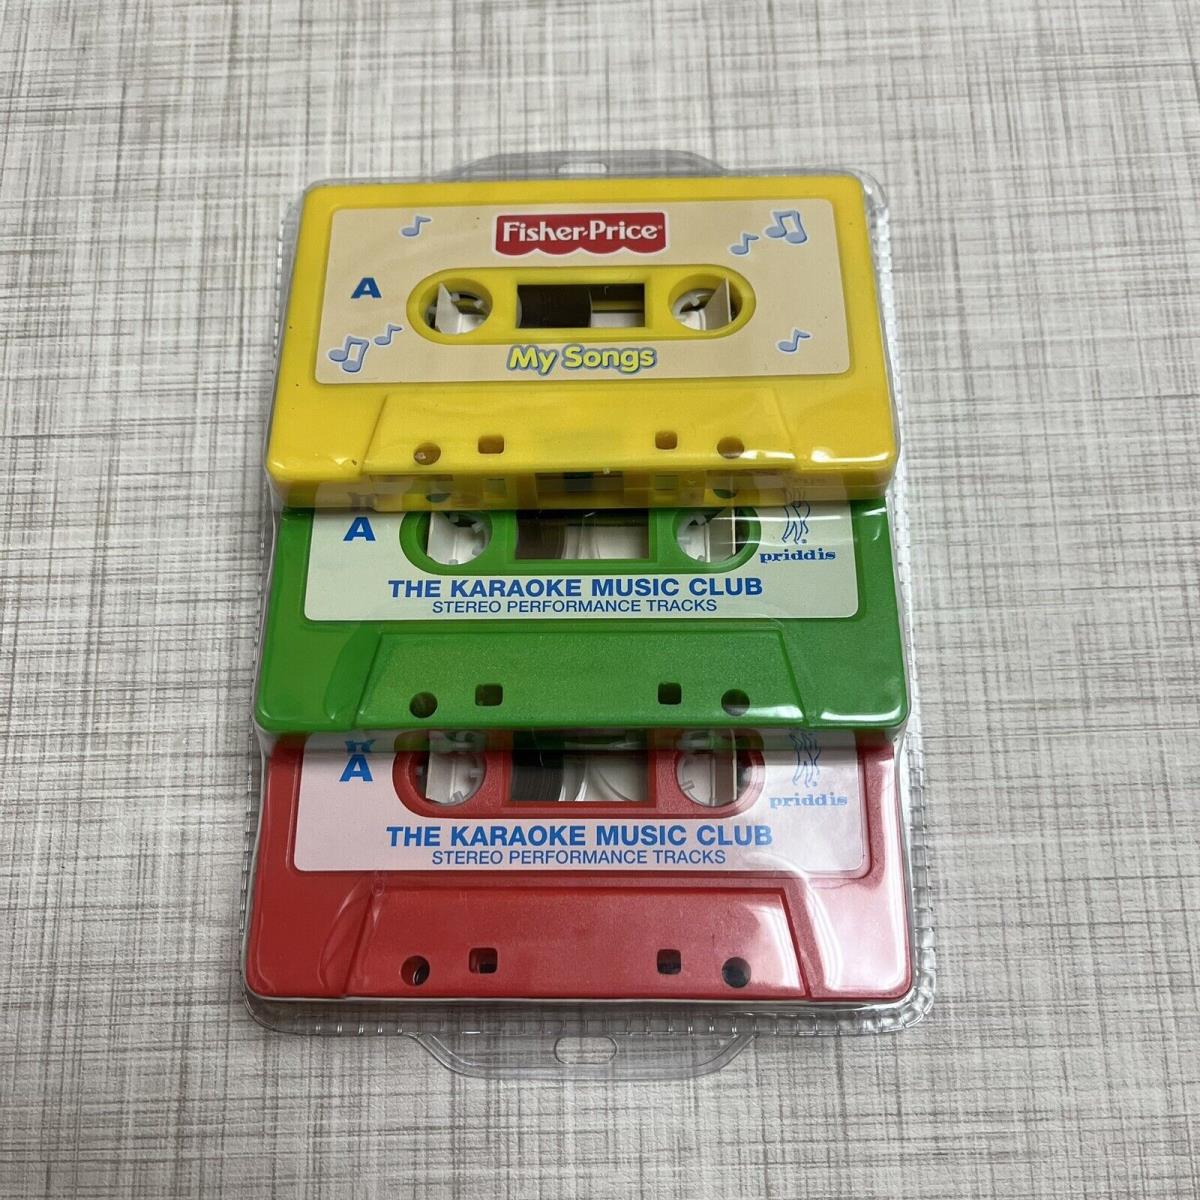 Vintage Fisher Price Cassette Audio Tapes and Microphones Karaoke